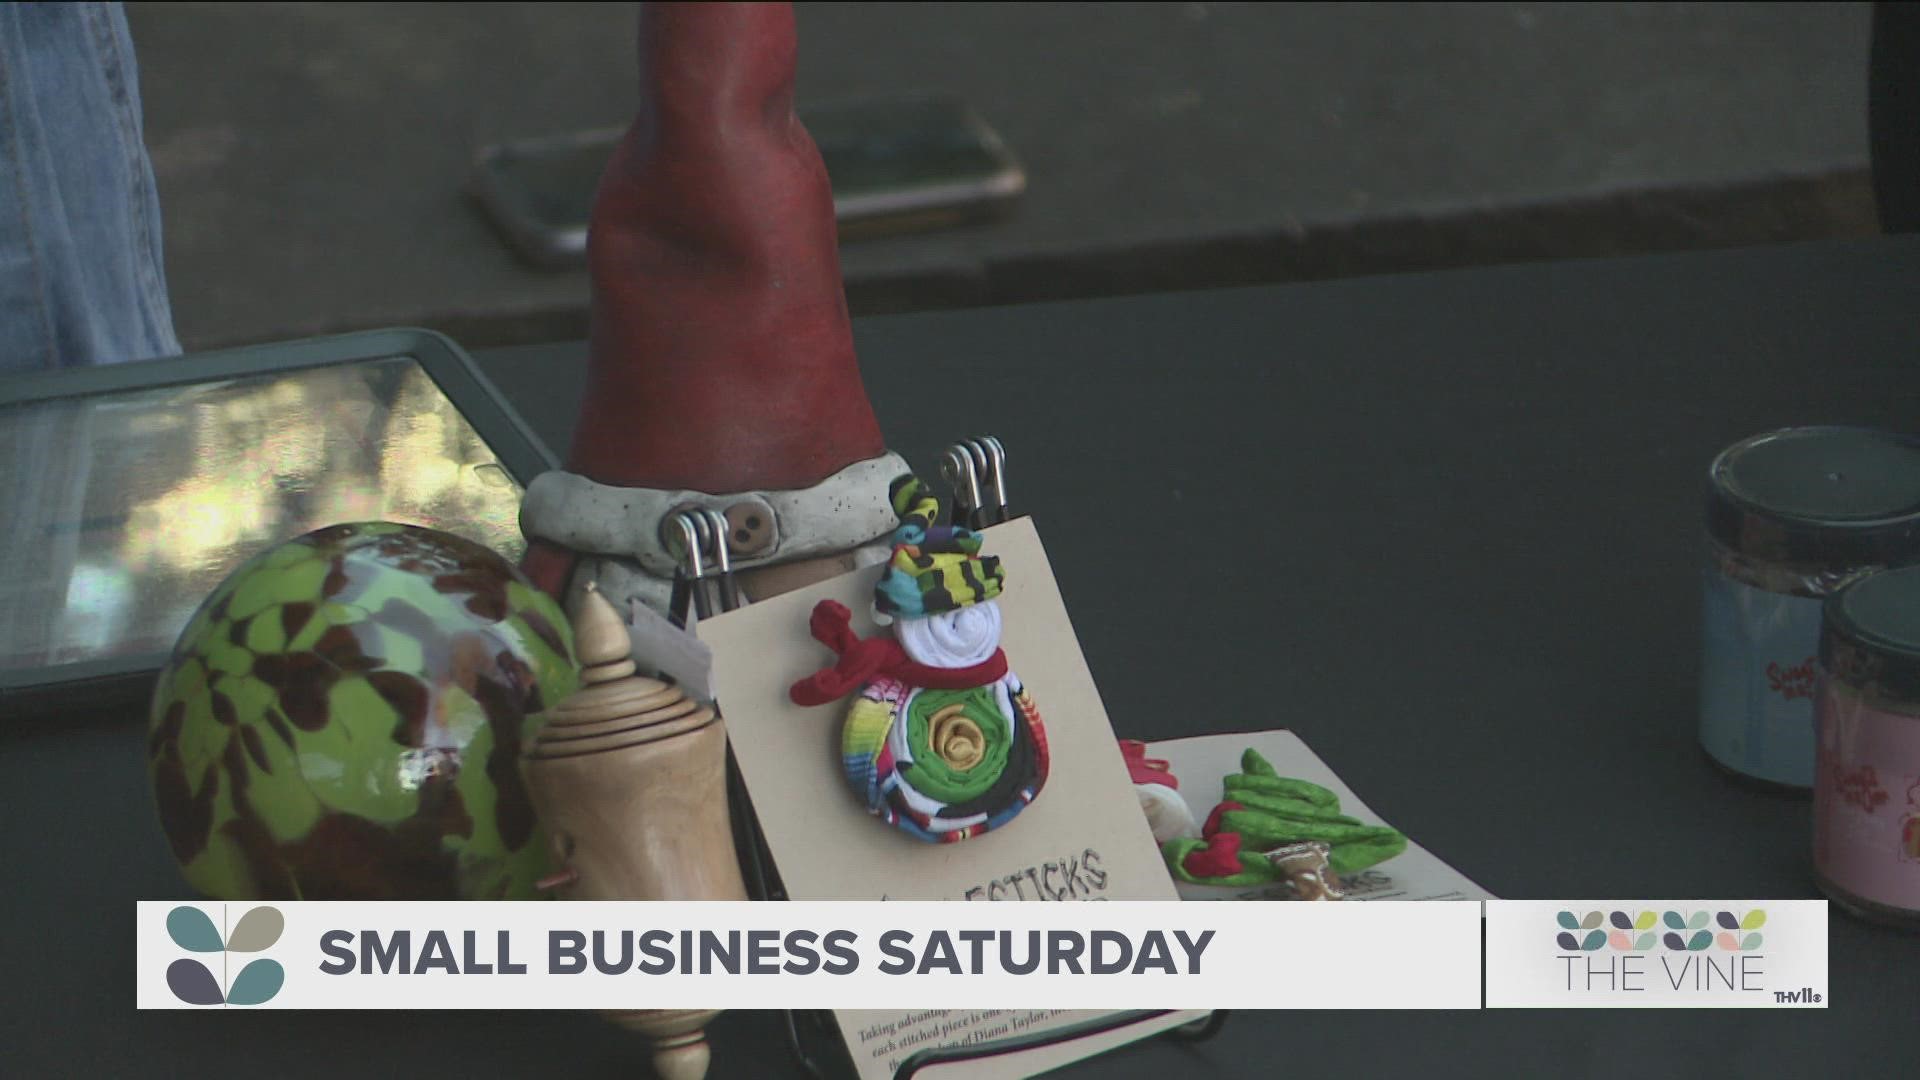 CALS has more than just great books. Tameka Lee shows us some gift ideas for Small Business Saturday.